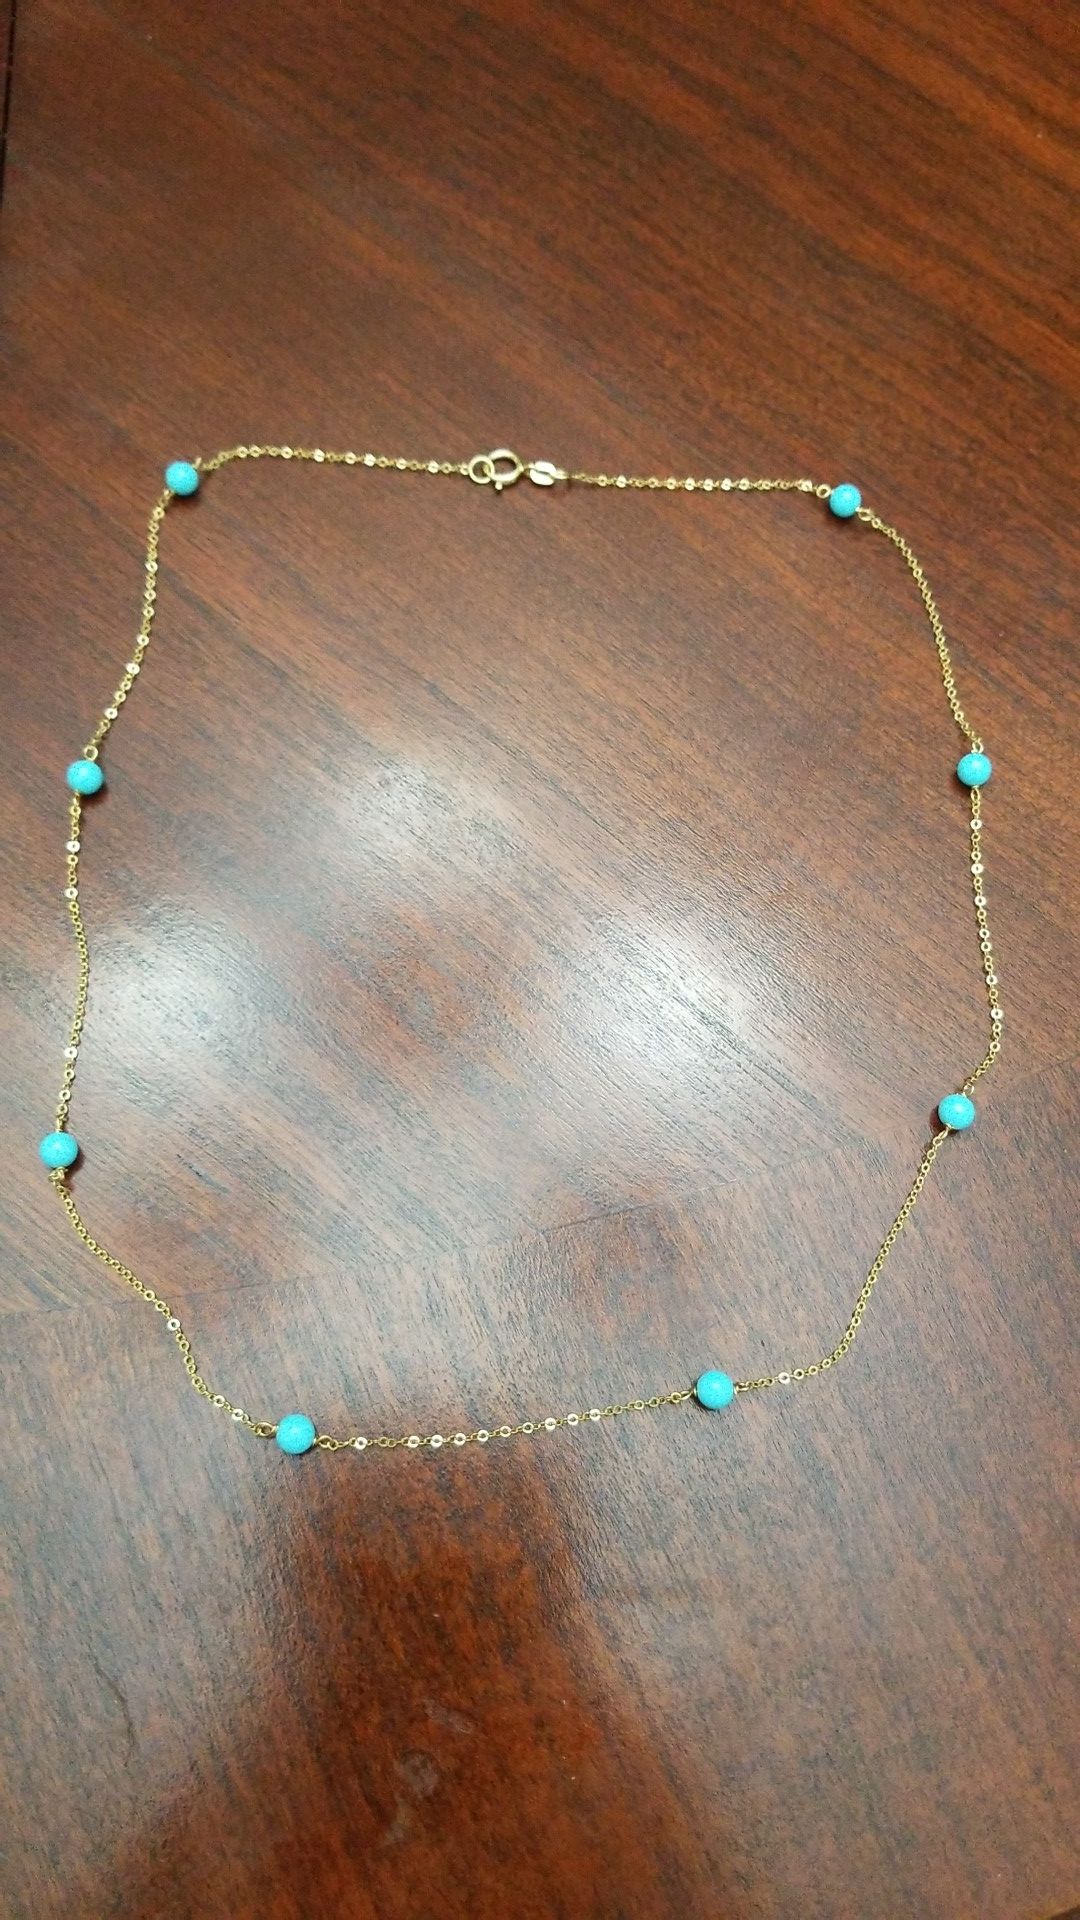 16" 14k necklace with turquoise beads